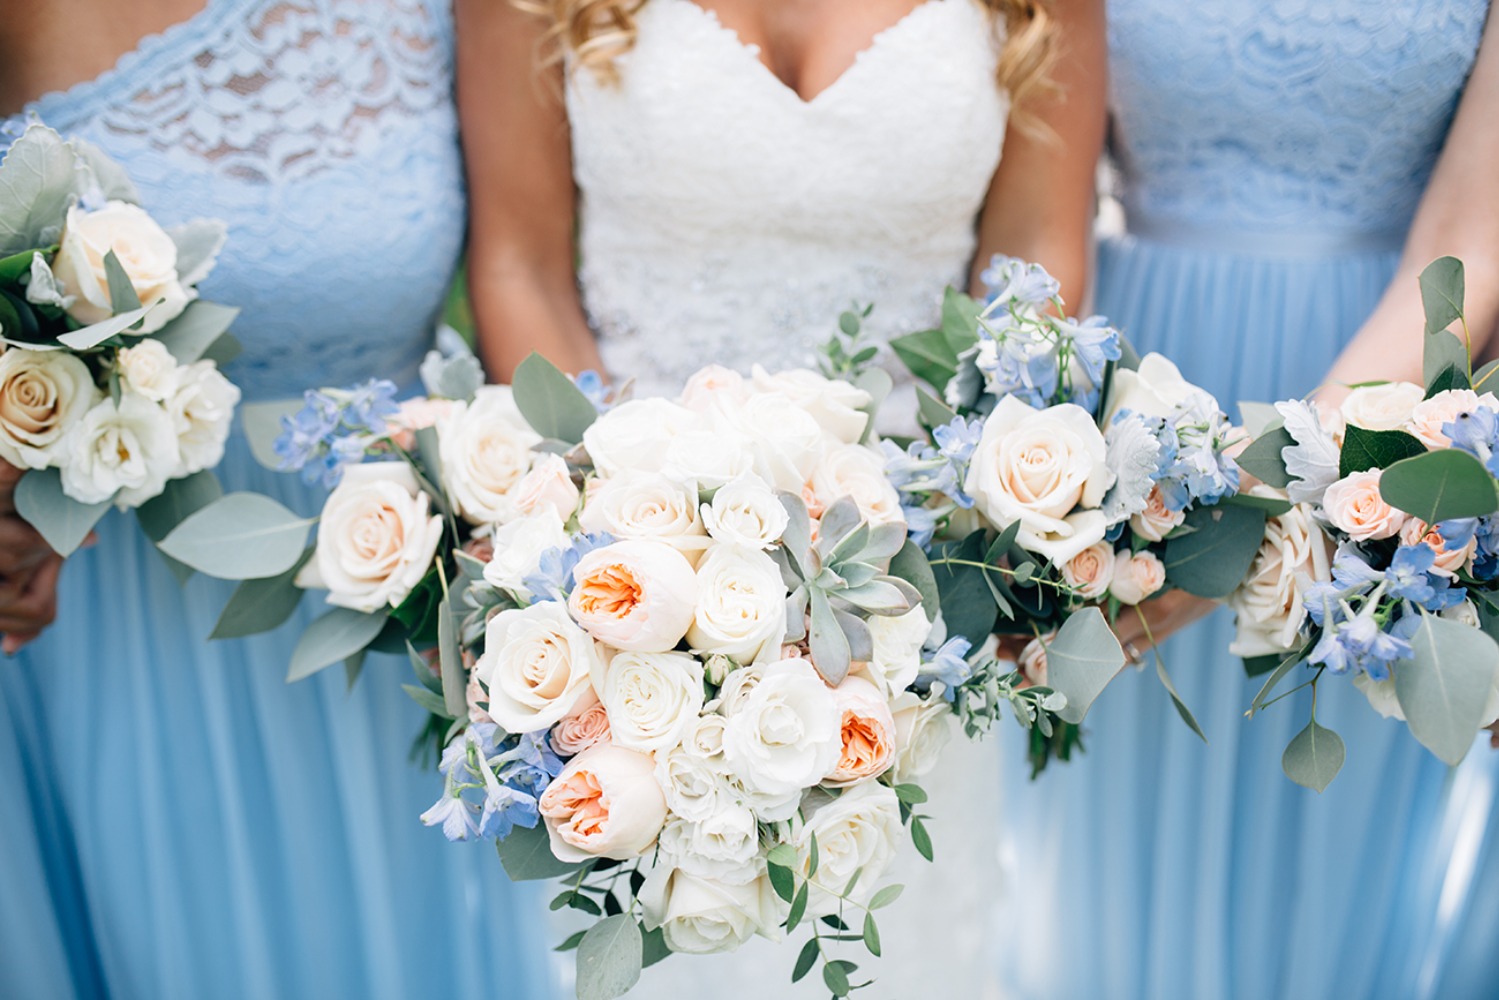 ice blue bridesmaids with blush and blue bouquets